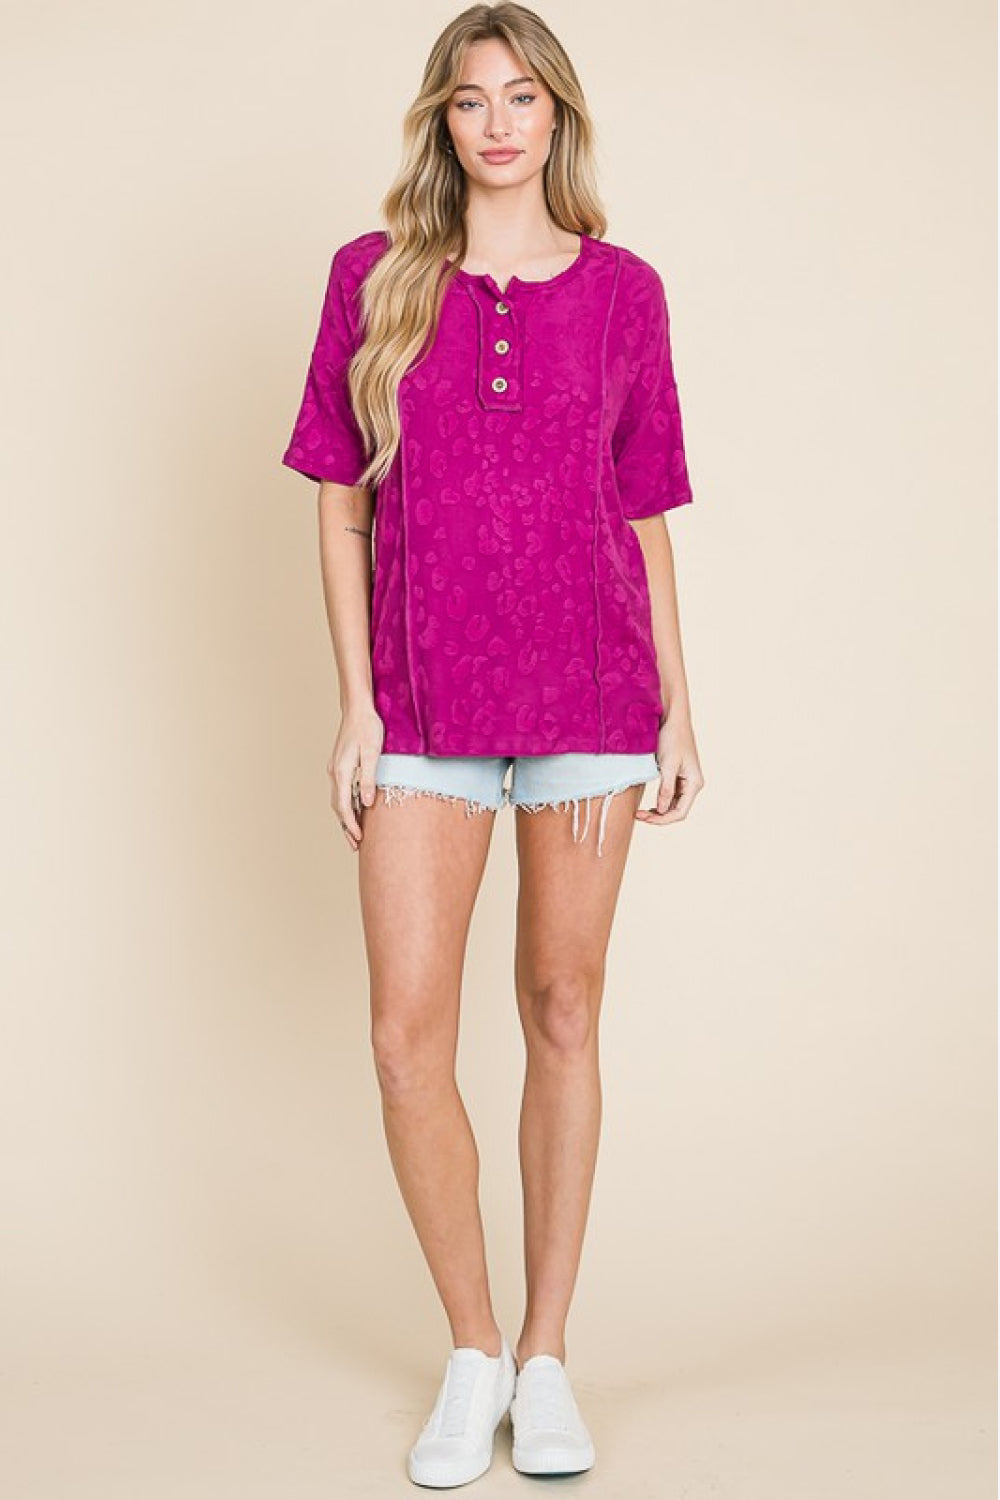 BOMBOM At The Fair Animal Textured Top - Ships from The US - women's shirt at TFC&H Co.